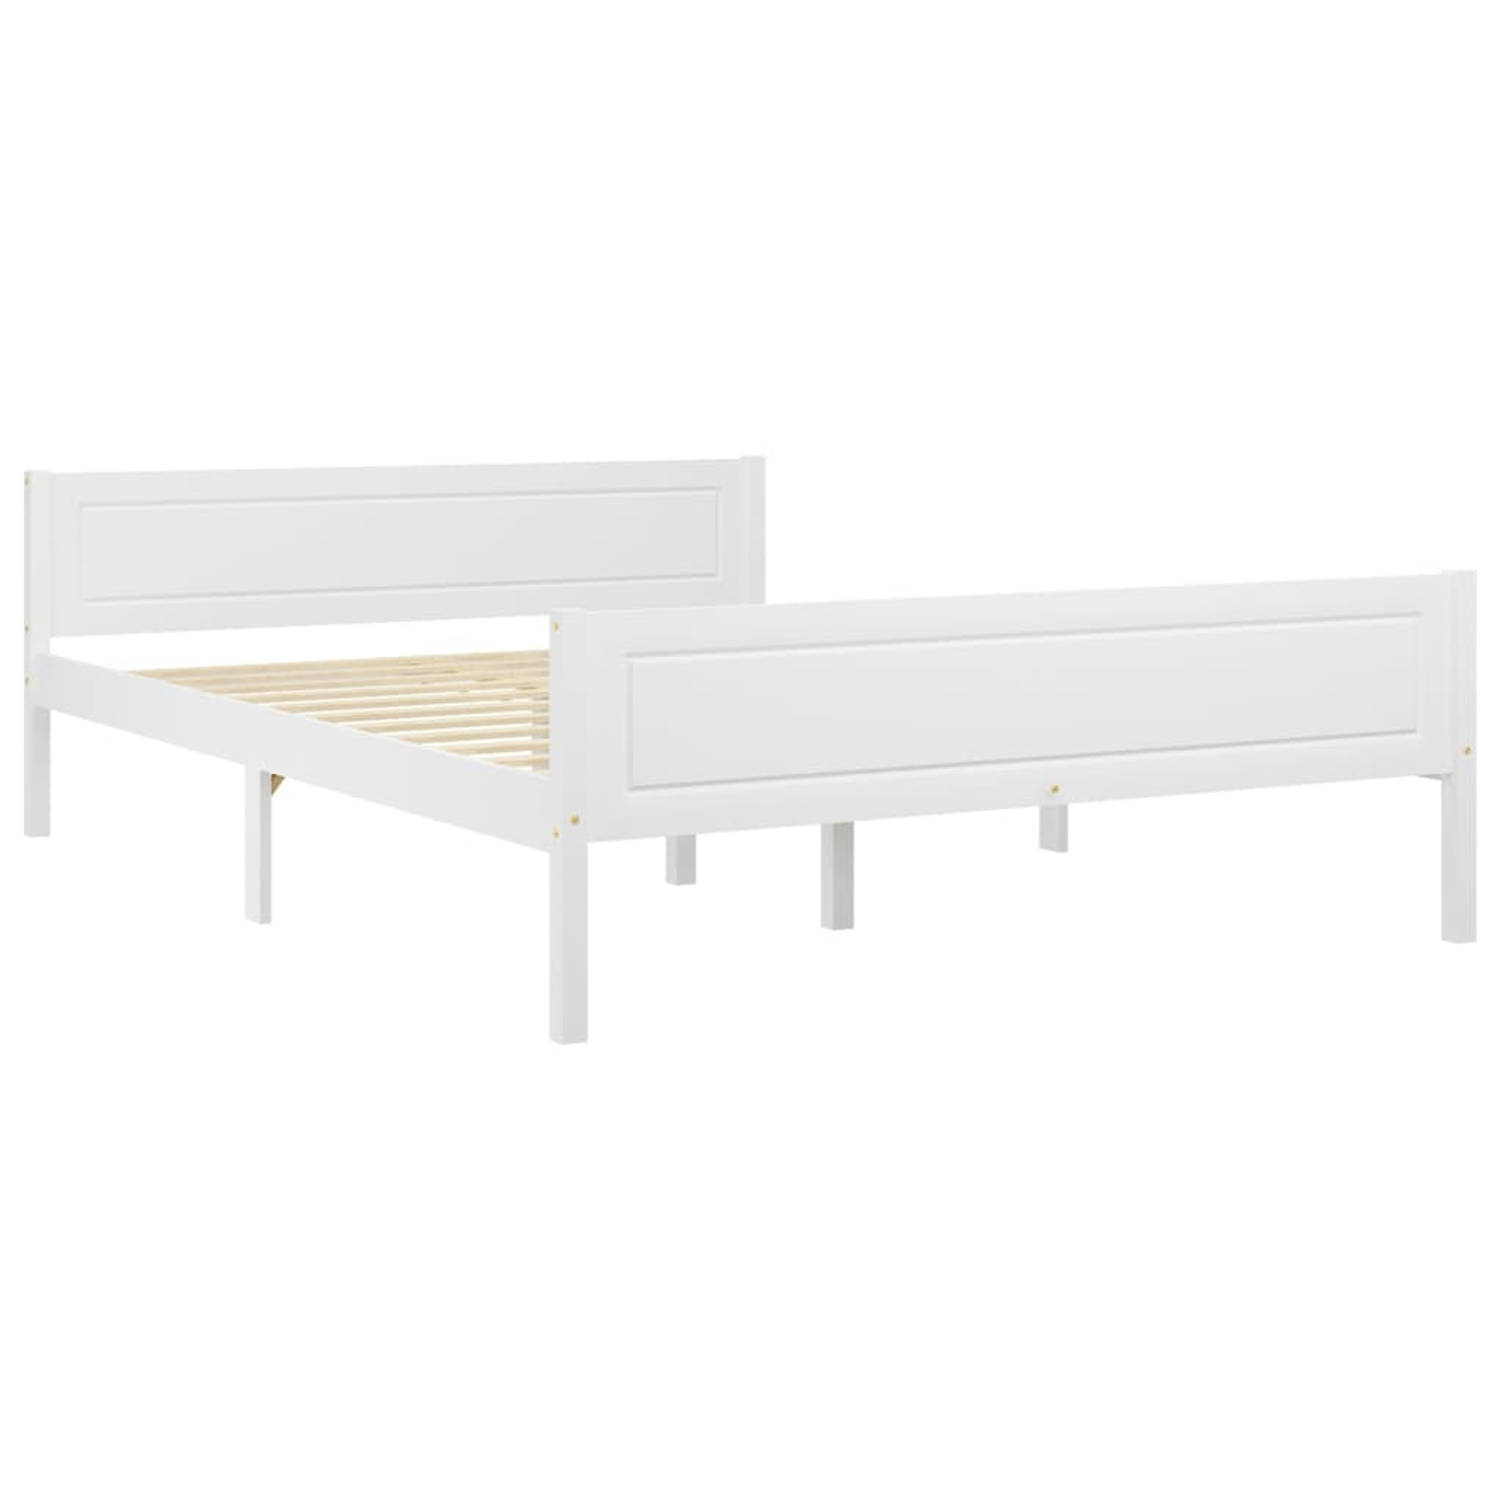 The Living Store Bedframe massief grenenhout wit 120x200 cm - Bedframe - Bedframe - Bed Frame - Bed Frames - Bed - Bedden - 2-persoonsbed - 2-persoonsbedden - Tweepersoons Bed